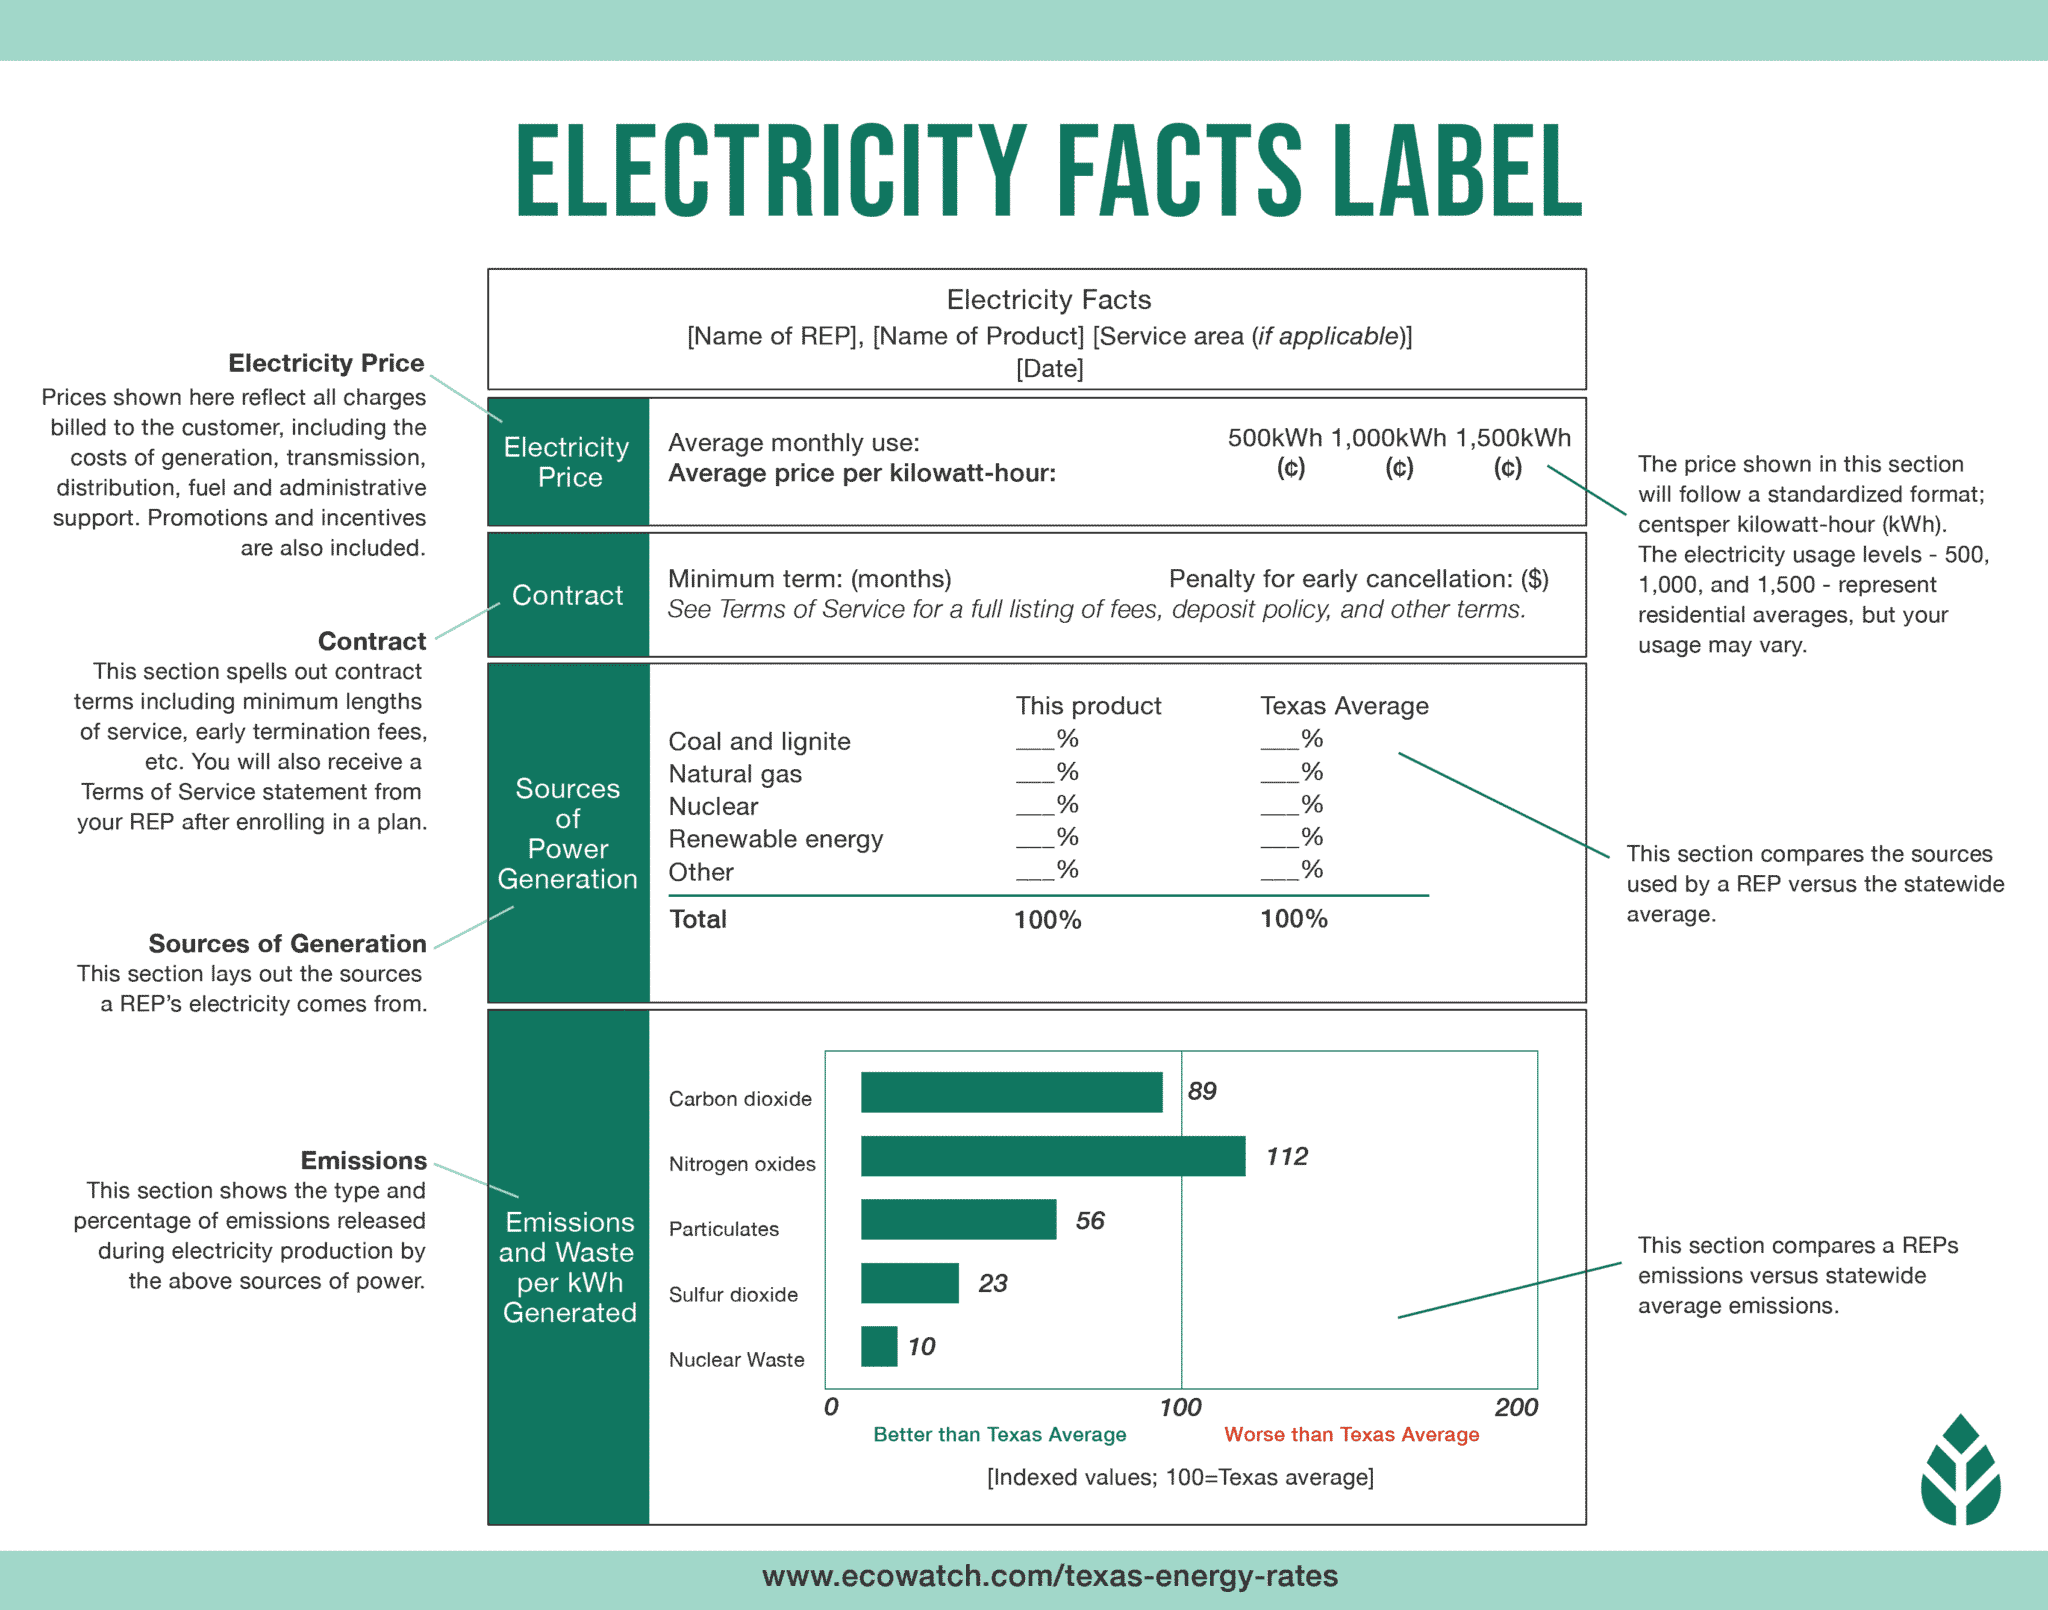 Electricity Facts Label for Dallas Homeowner